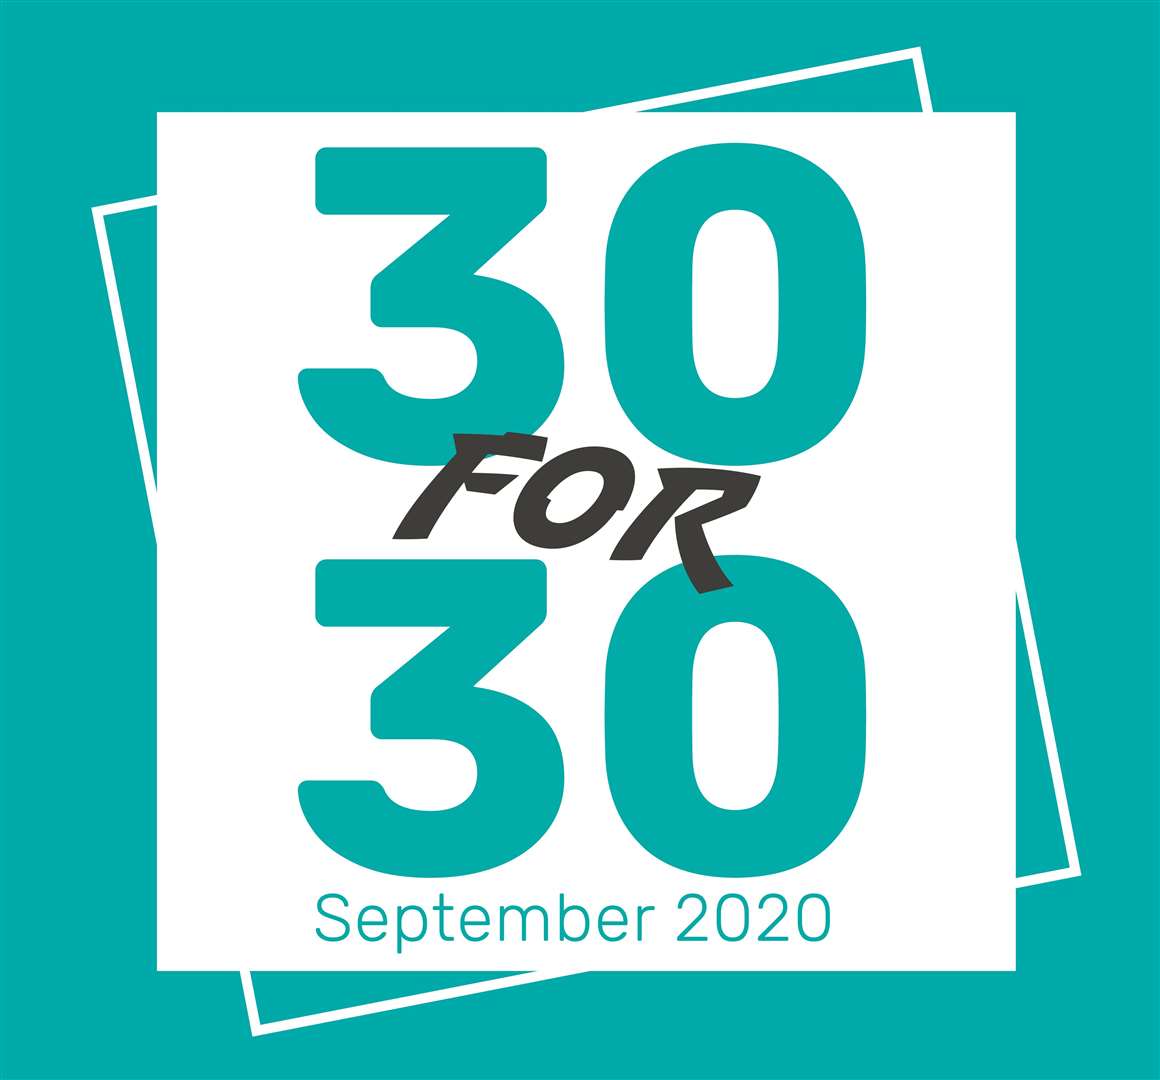 Kent, Surrey and Sussex Air Ambulance have a 30 for 30 Challenge for their anniversary